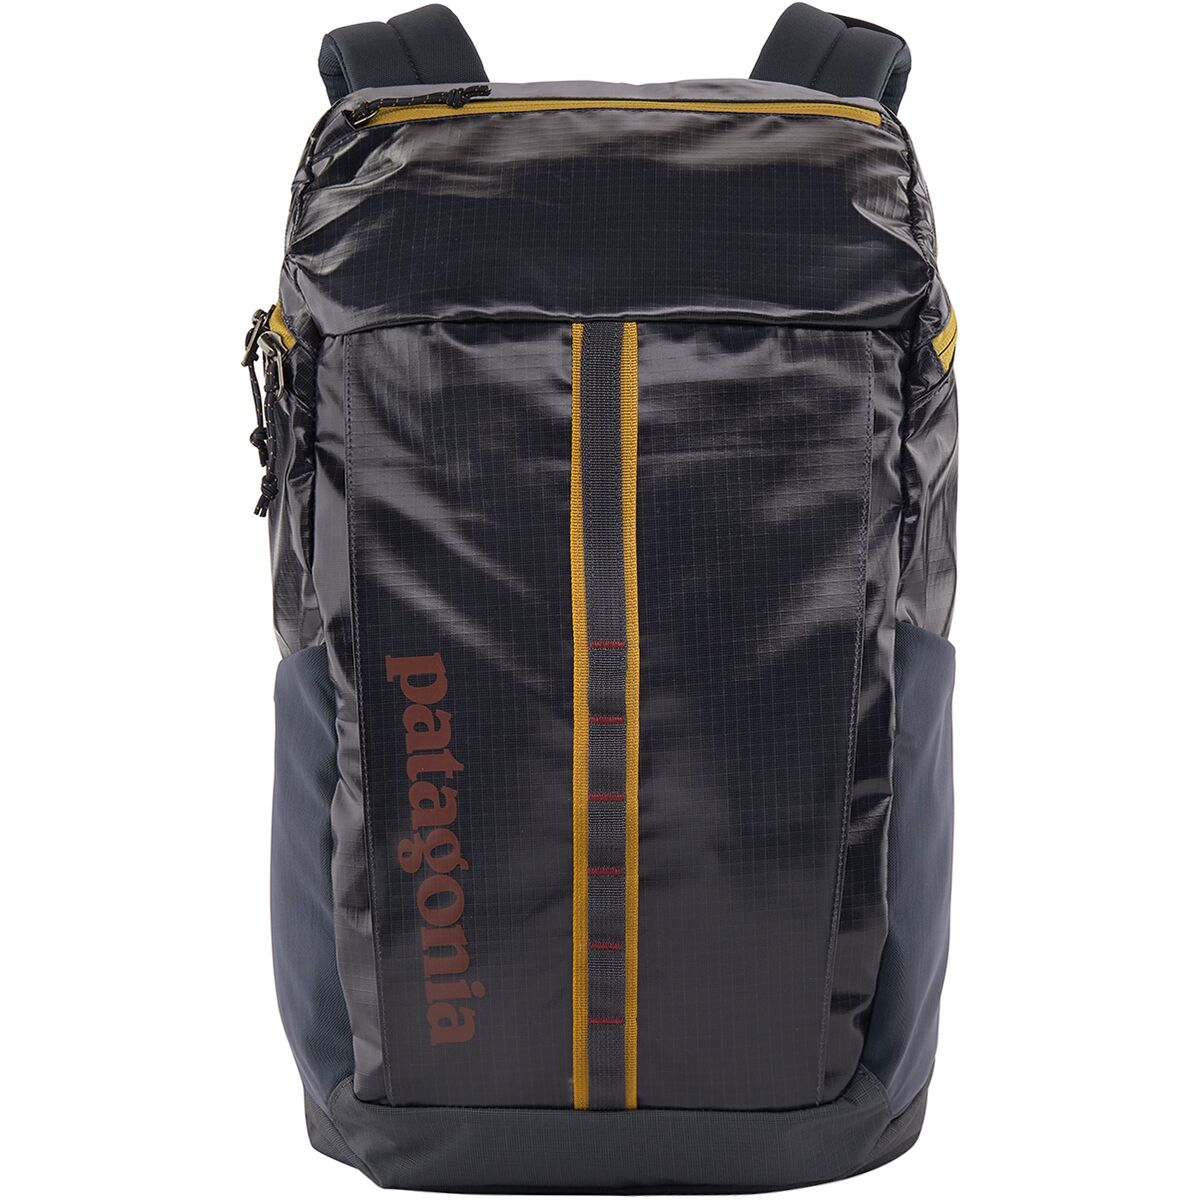 Patagonia Black Hole 23L Backpack - Women's